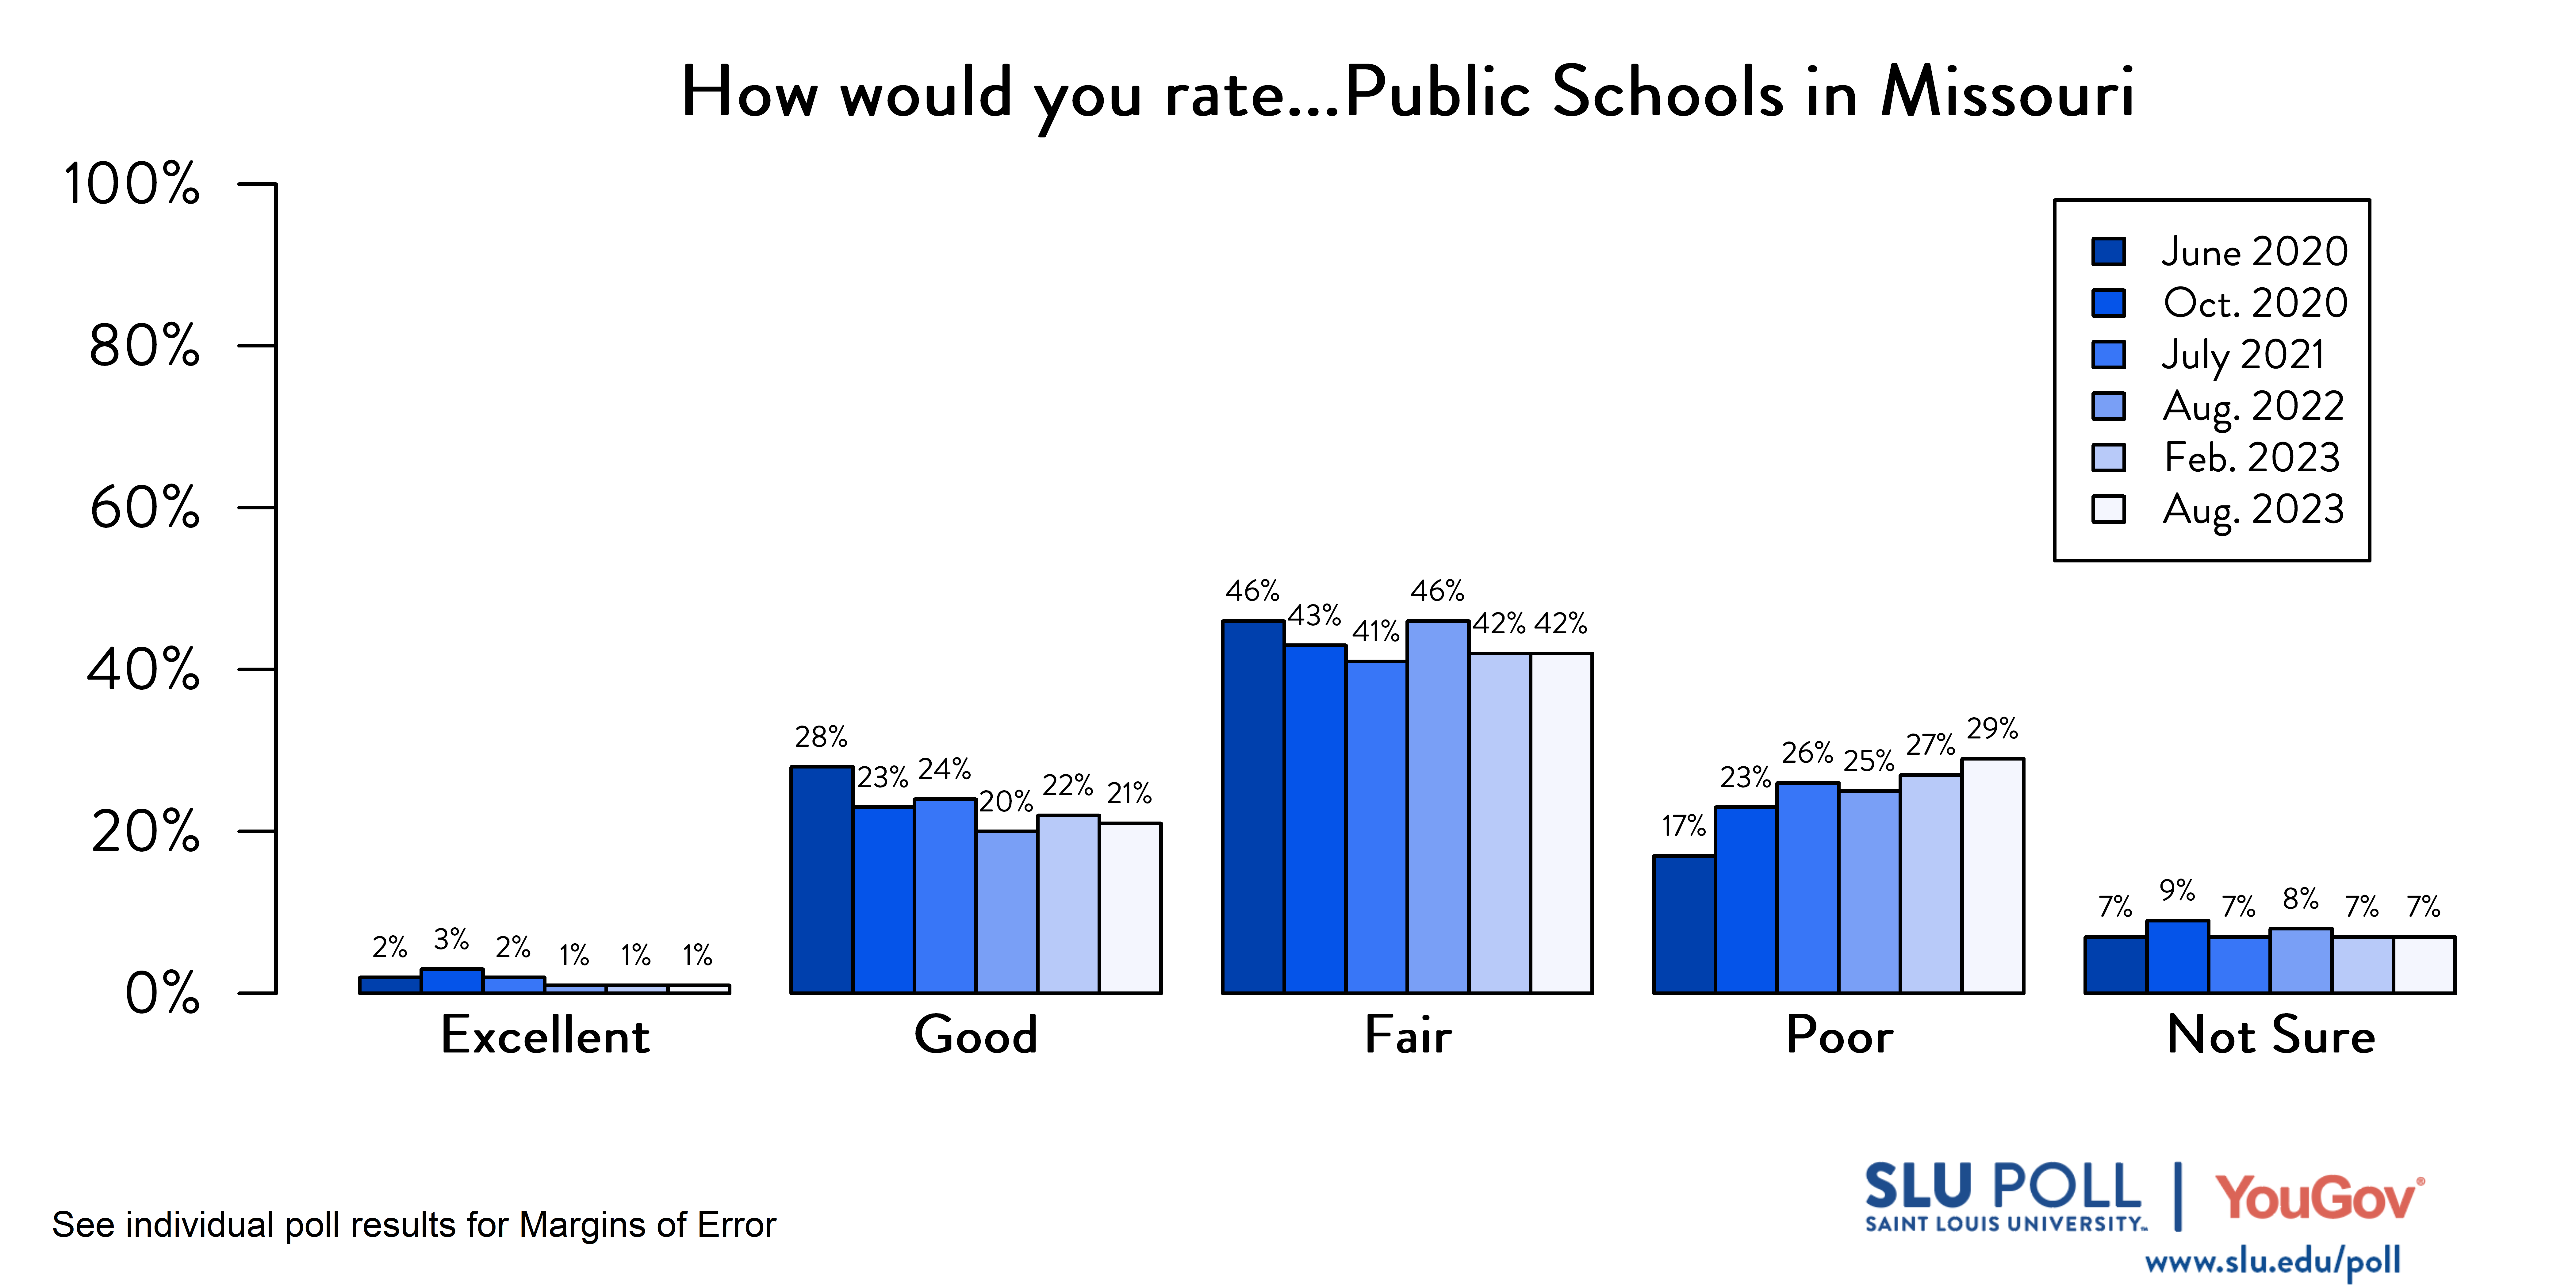 Likely voters' responses to 'How would you rate the condition of the following: Public Schools in the State of Missouri?'. June 2020 Voter Responses 2% Excellent, 28% Good, 46% Fair, 17% Poor, and 7% Not Sure. October 2020 Voter Responses: 3% Excellent, 23% Good, 43% Fair, 23% Poor, and 9% Not sure. July 2021 Voter Responses: 2% Excellent, 24% Good, 41% Fair, 26% Poor, and 7% Not sure. August 2022 Voter Responses: 1% Excellent, 20% Good, 46% Fair, 25% Poor, and 8% Not sure. February 2023 Voter Responses: 1% Excellent, 22% Good, 42% Fair, 27% Poor, and 7% Not sure. August 2023 Voter Responses: 1% Excellent, 21% Good, 42% Fair, 29% Poor, and 7% Not sure.